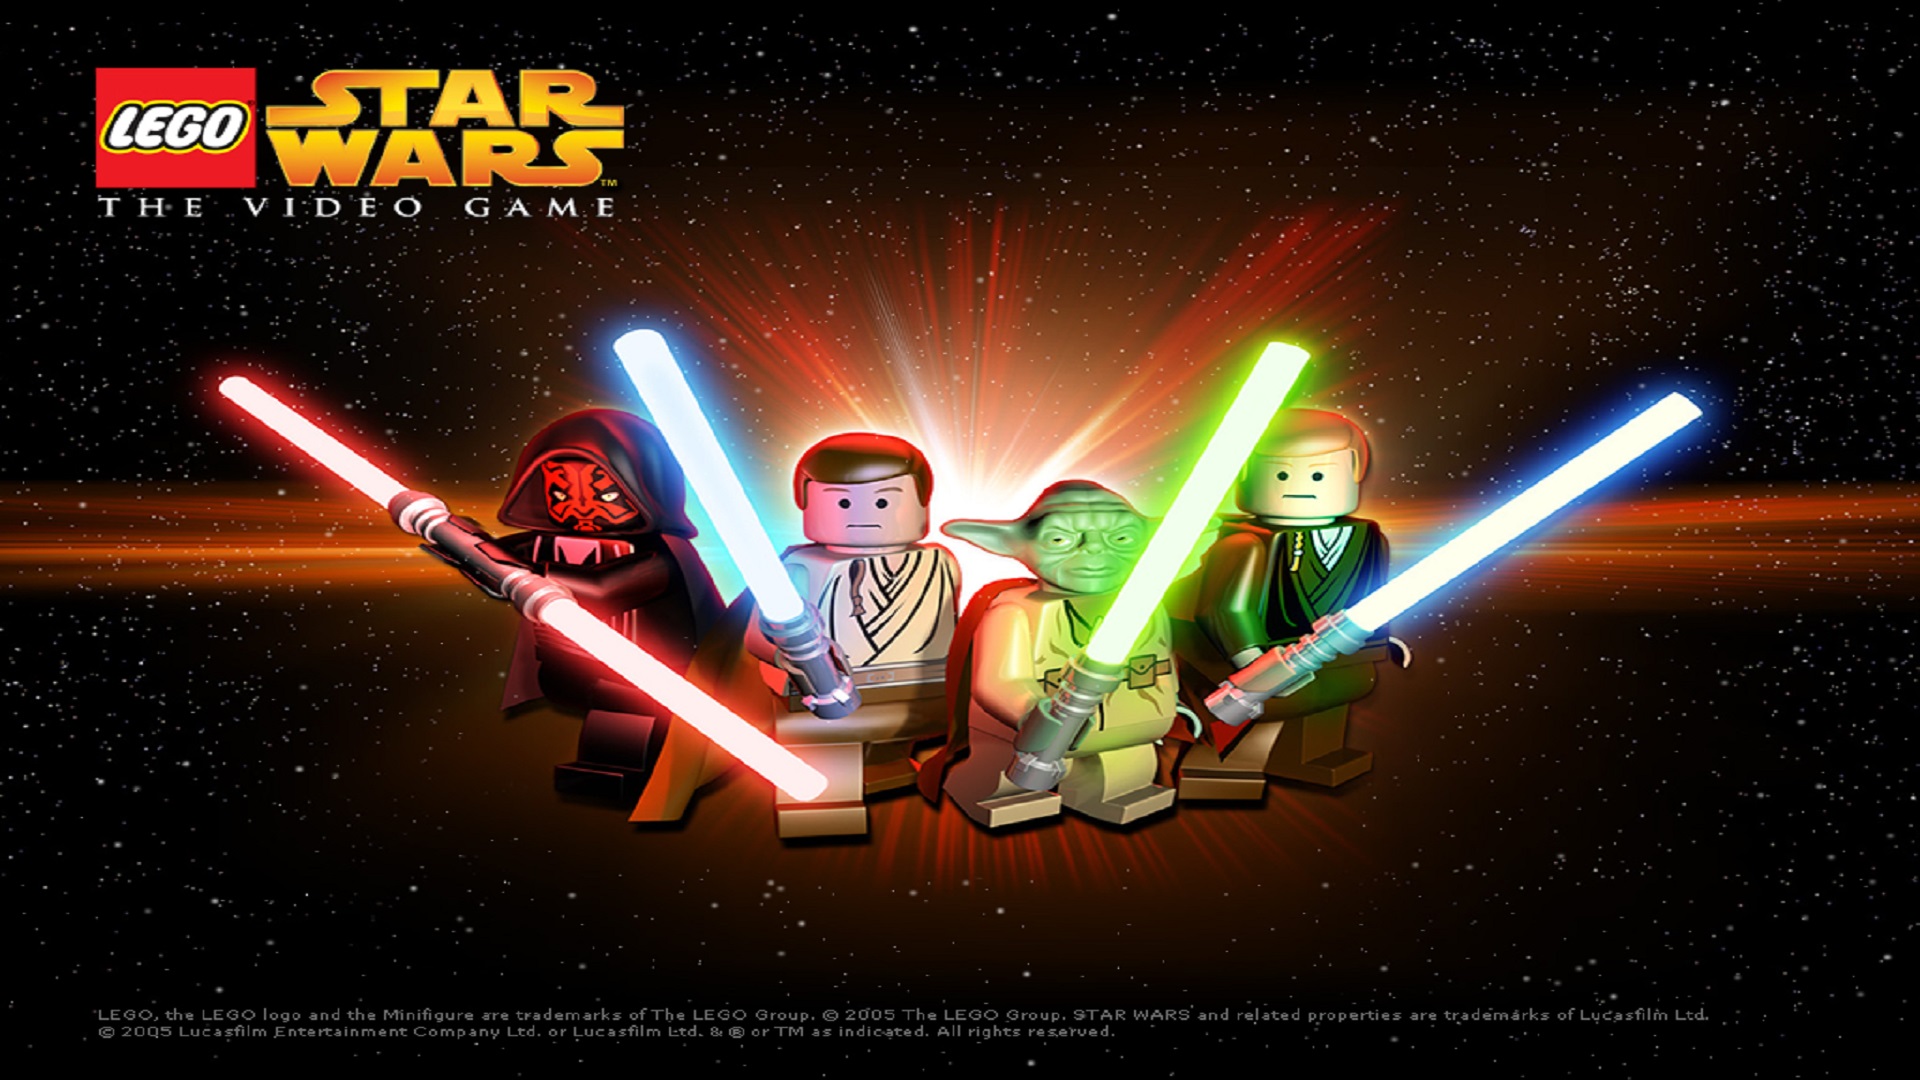 Video Game LEGO Star Wars: The Video Game HD Wallpaper | Background Image